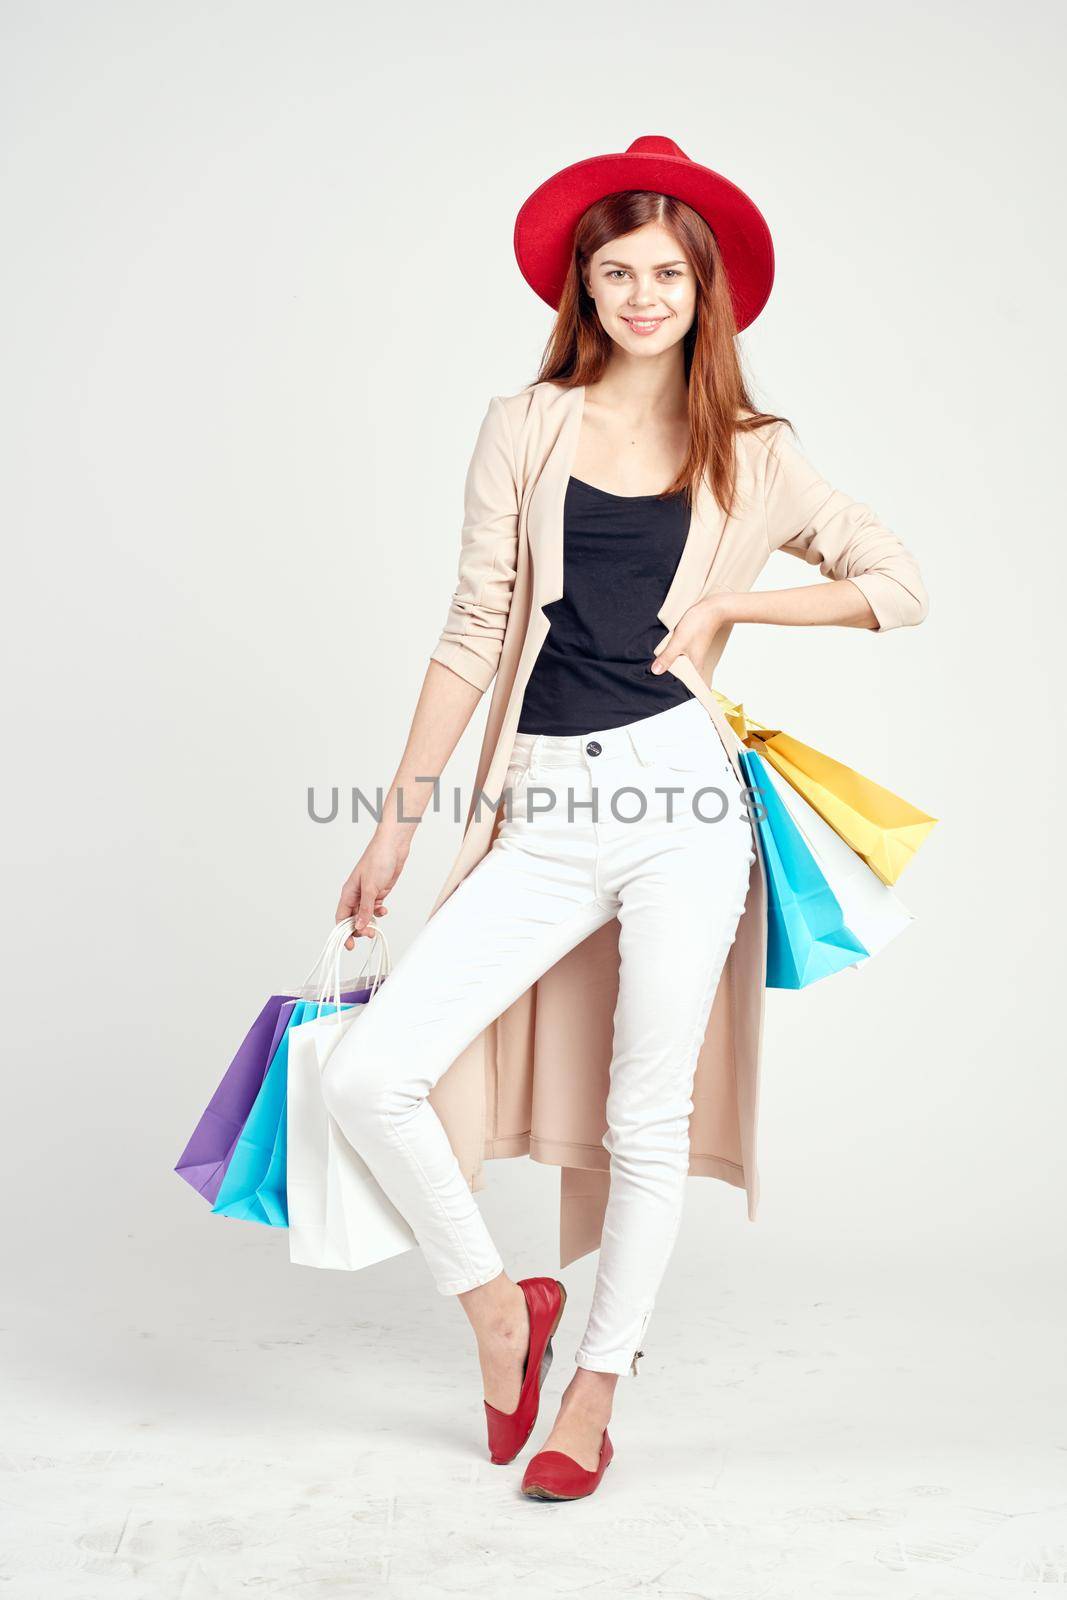 beautiful woman attractive look shopping smile light background. High quality photo